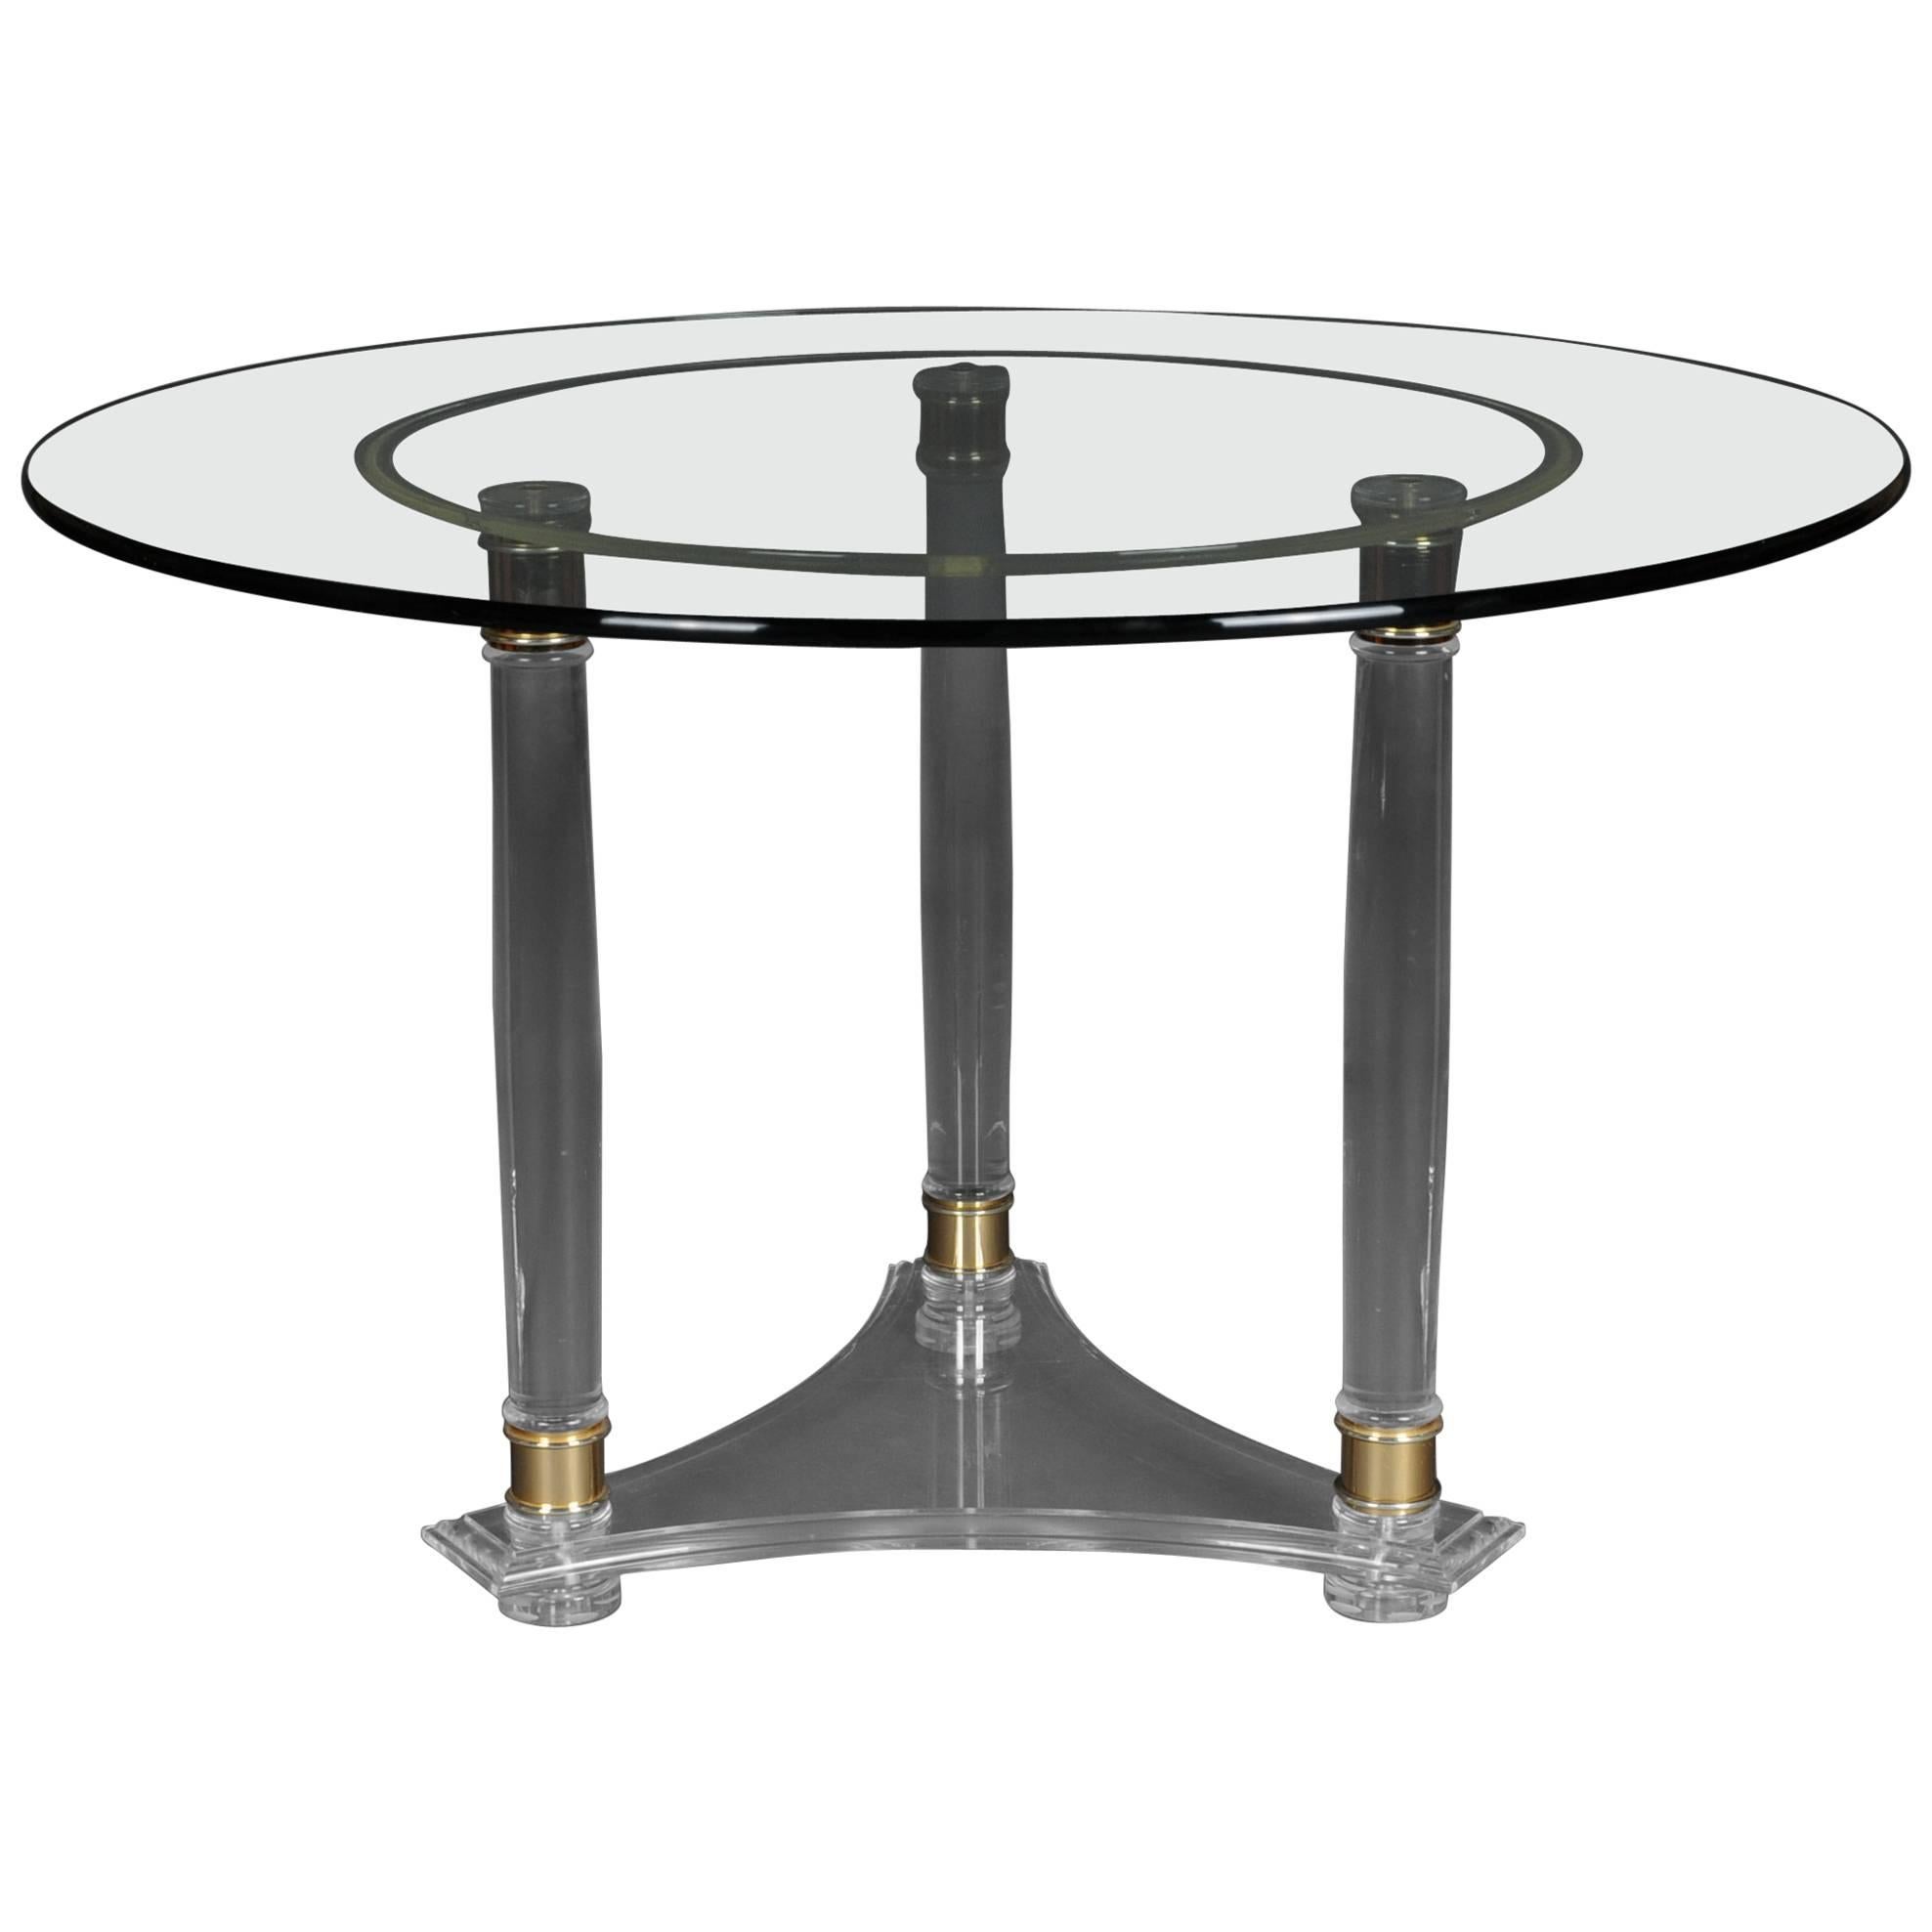 Large, Round Designer Acrylic Table with Brass For Sale